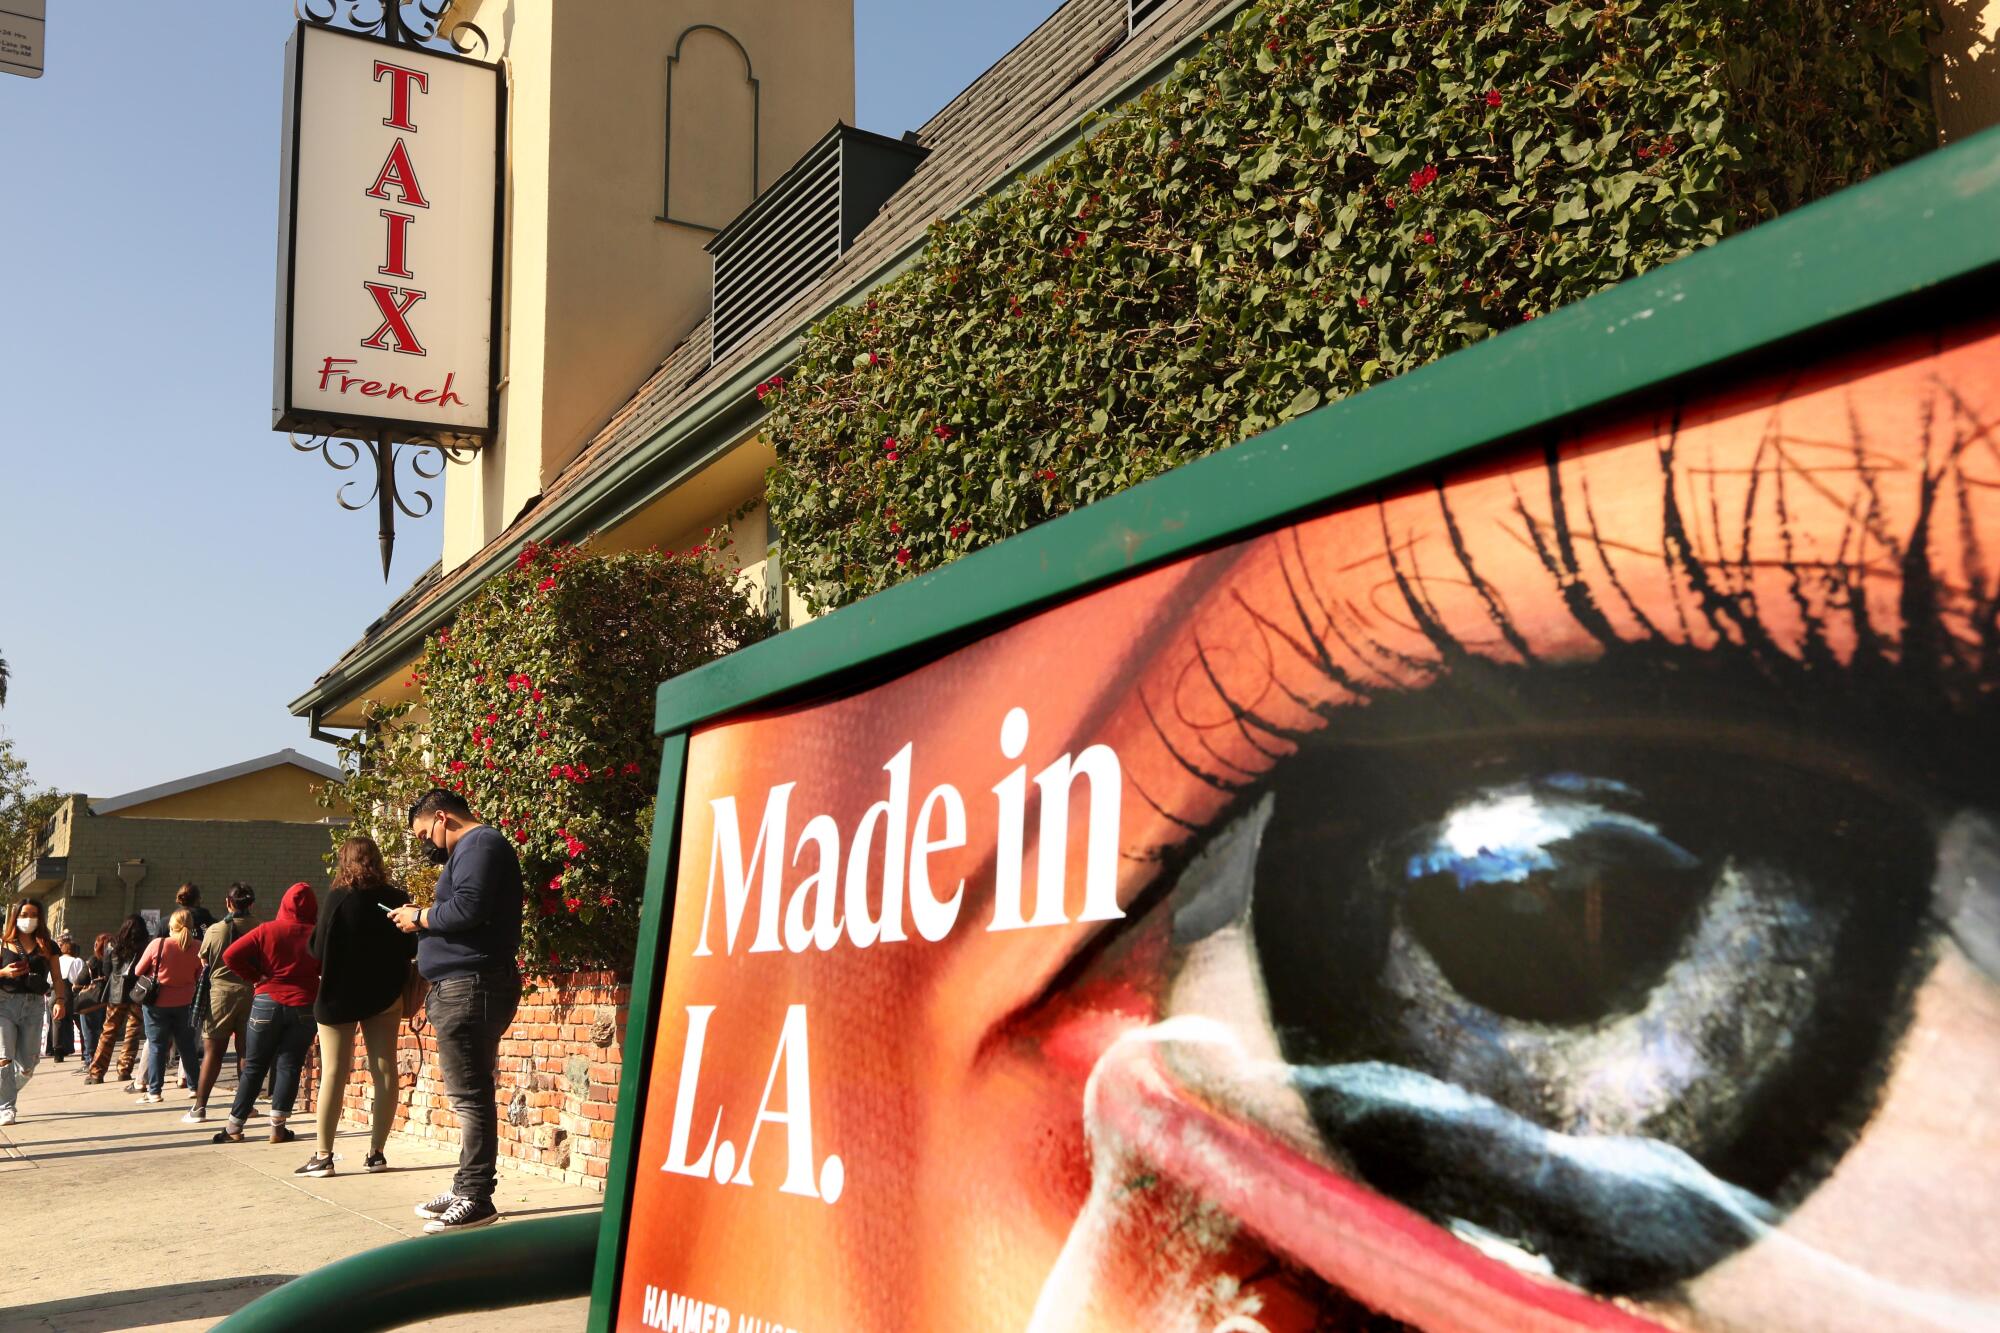 A line of people wait on a sidewalk outside a restaurant. In the foreground, a bus-bench ad says "Made in L.A."